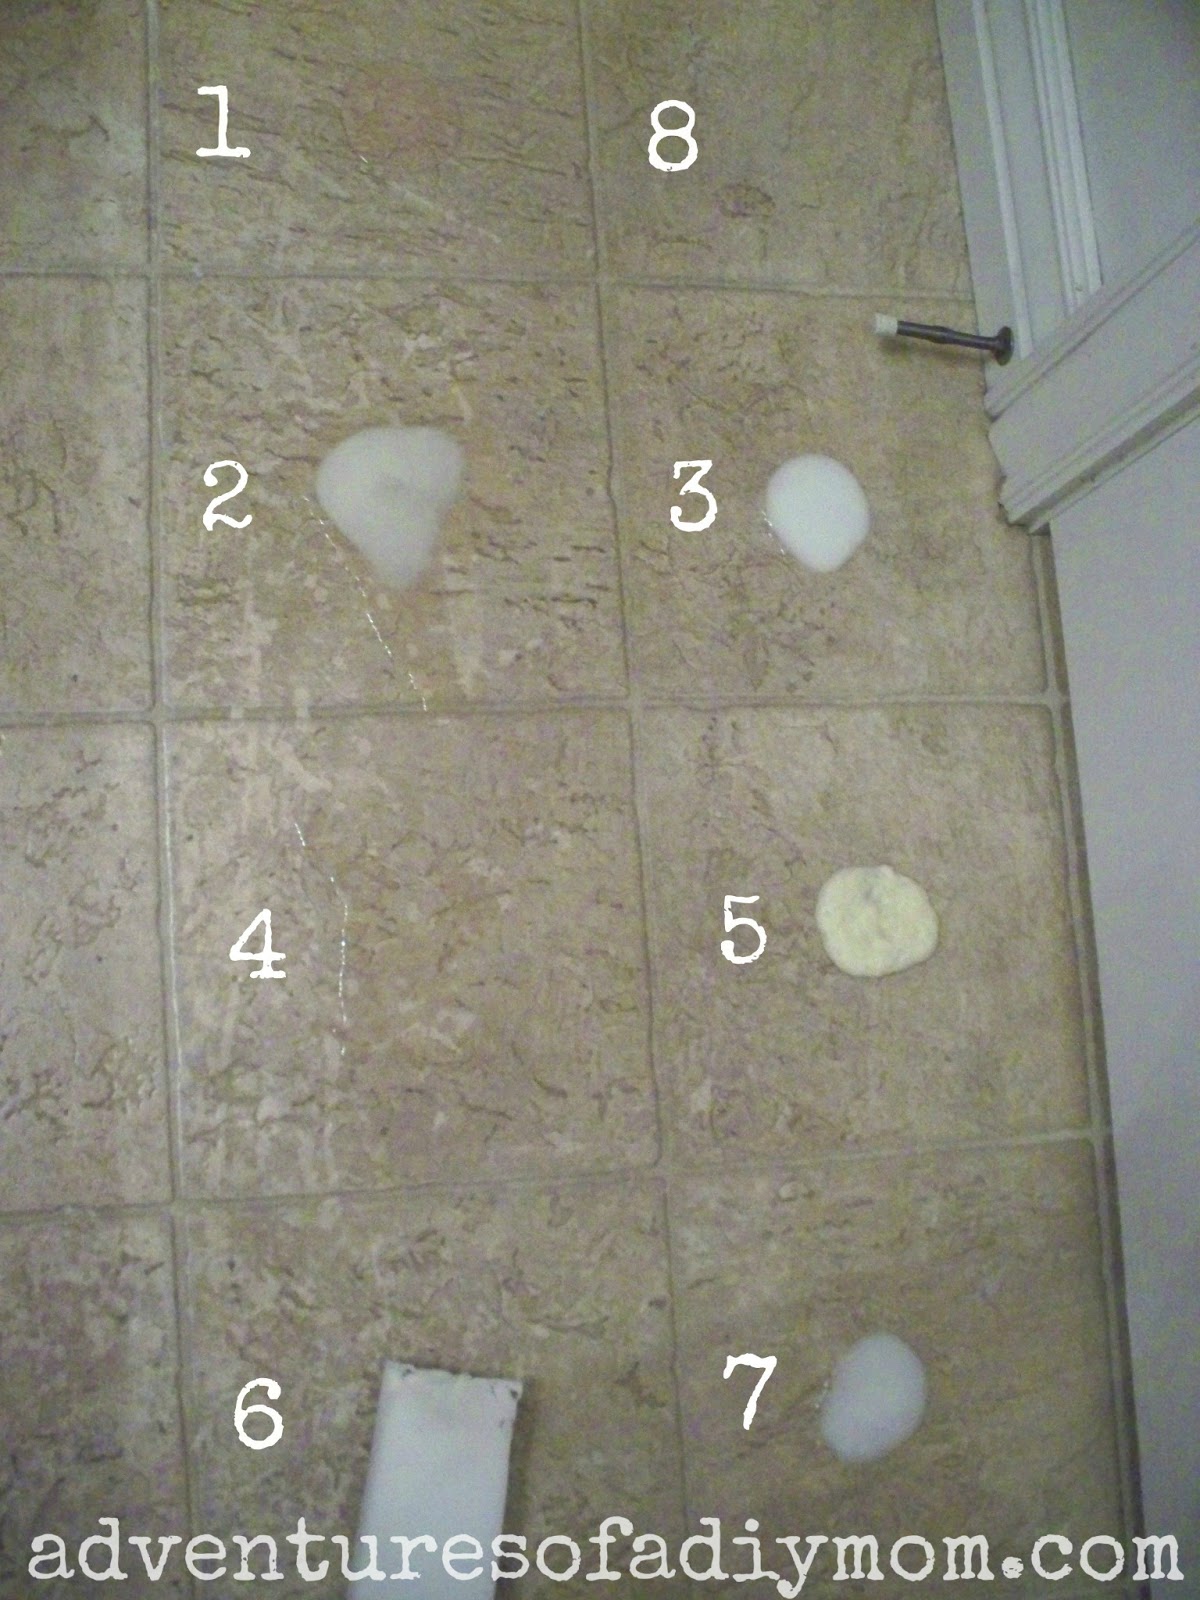 How to Remove Hairspray Residue from Floor - Adventures of a DIY Mom